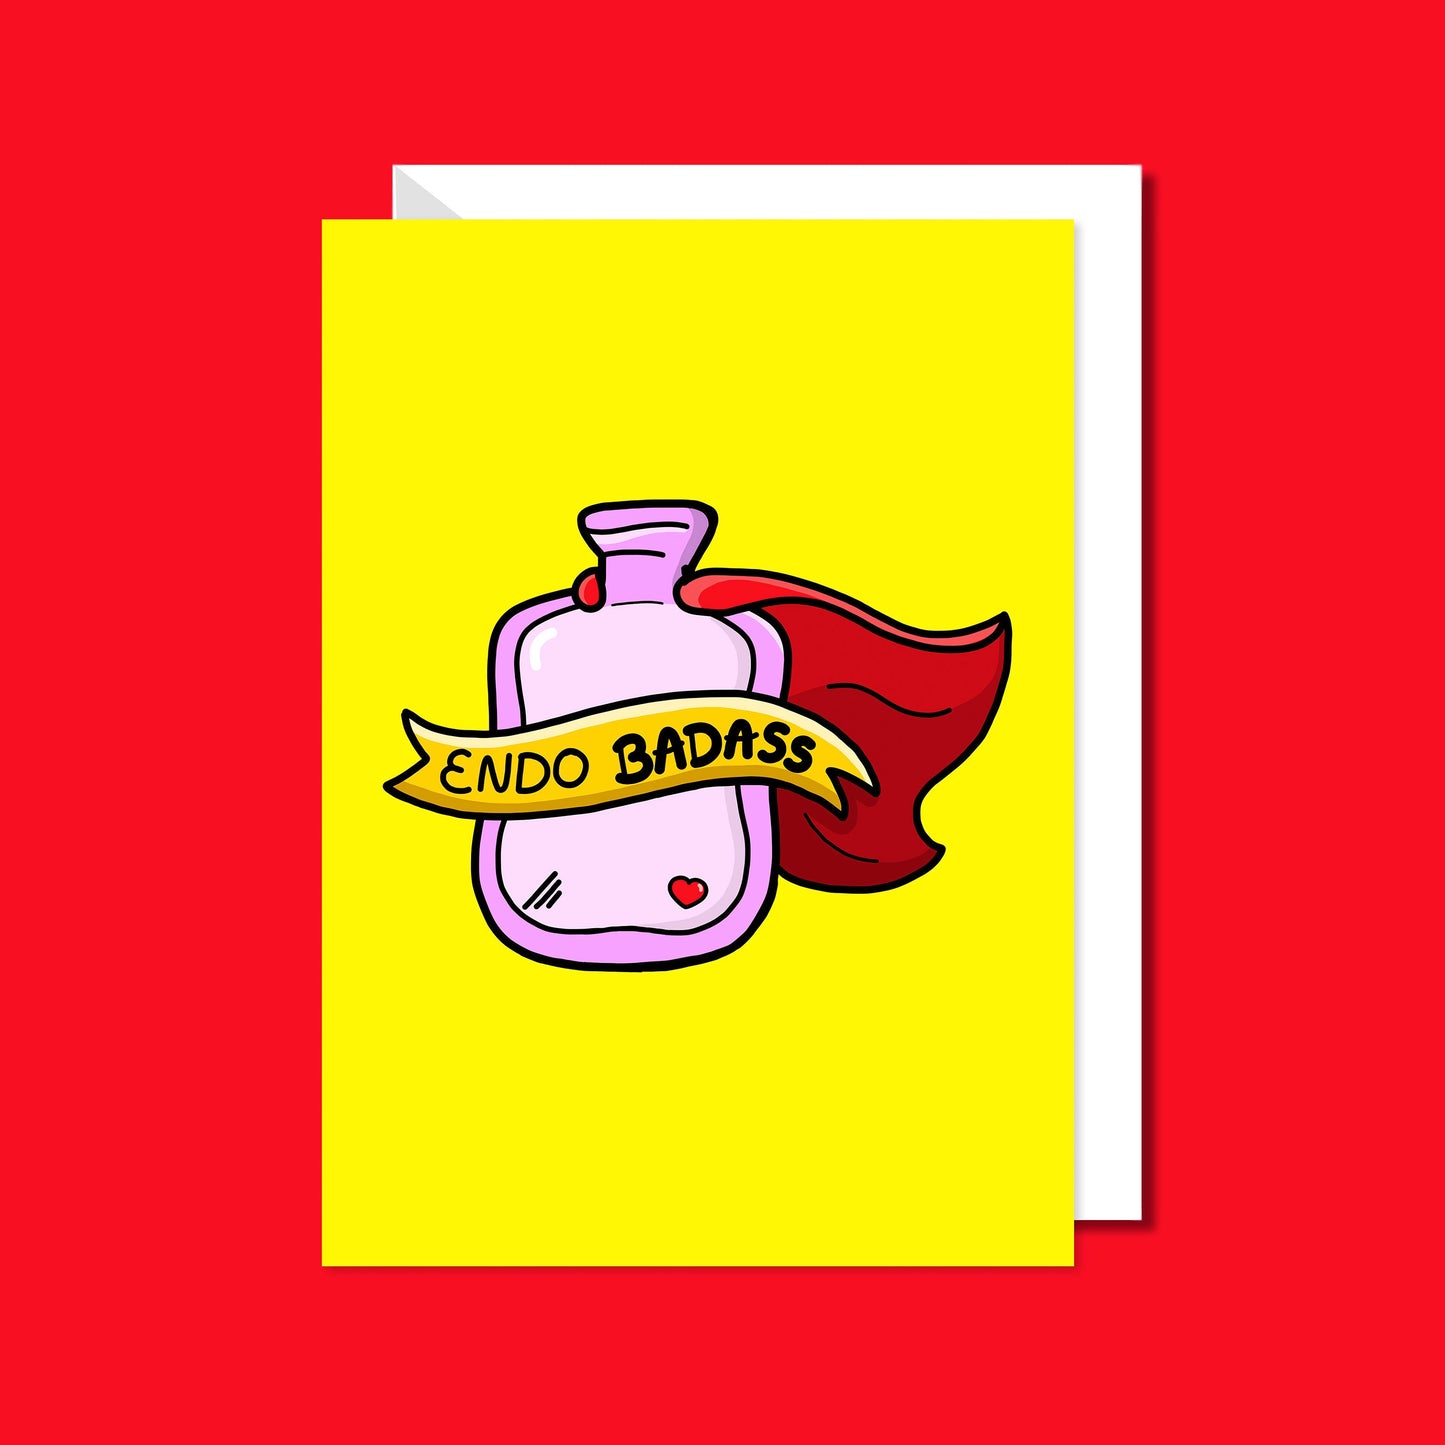 The Endo Badass Card - Endometriosis on a red background with a white envelope. The yellow based card features a pink hot waterbottle with a small red heart, a red cape and a yellow banner across reading 'endo badass'. Hand drawn design is raising awareness for Endometriosis and pelvic pain.